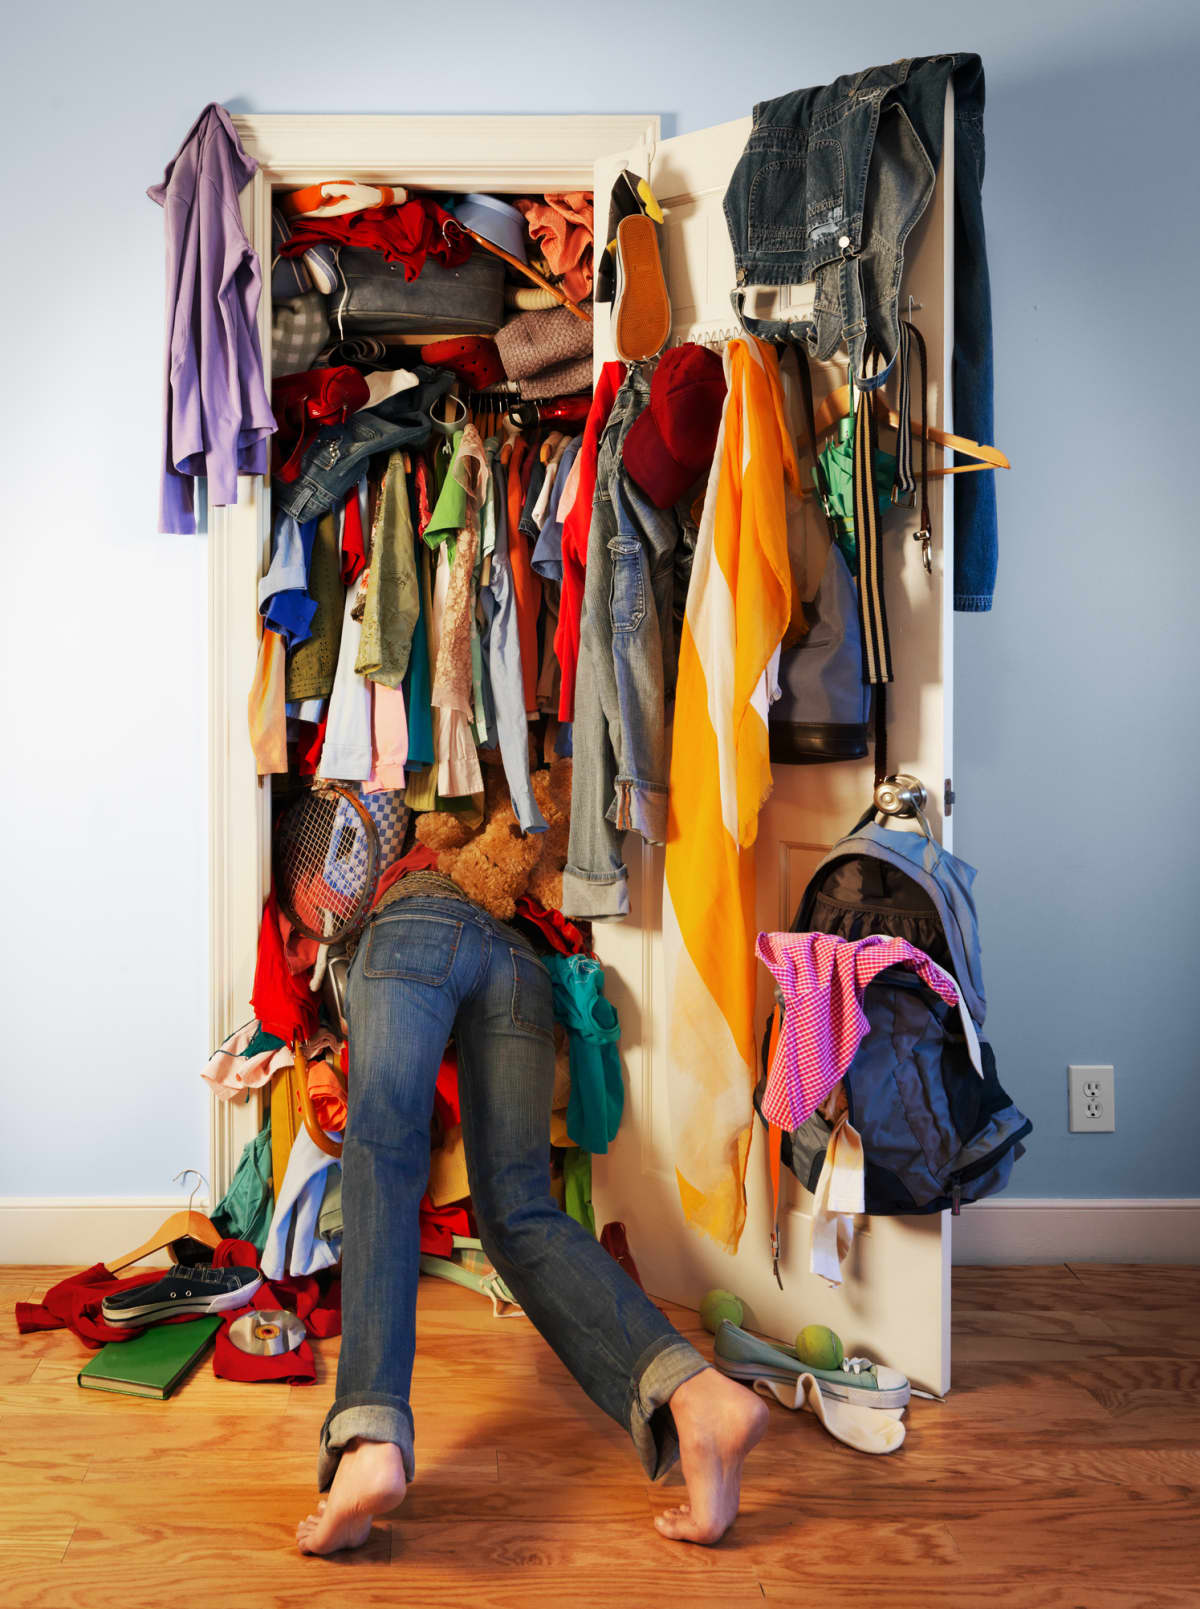 Person disappearing into a messy, packed closet